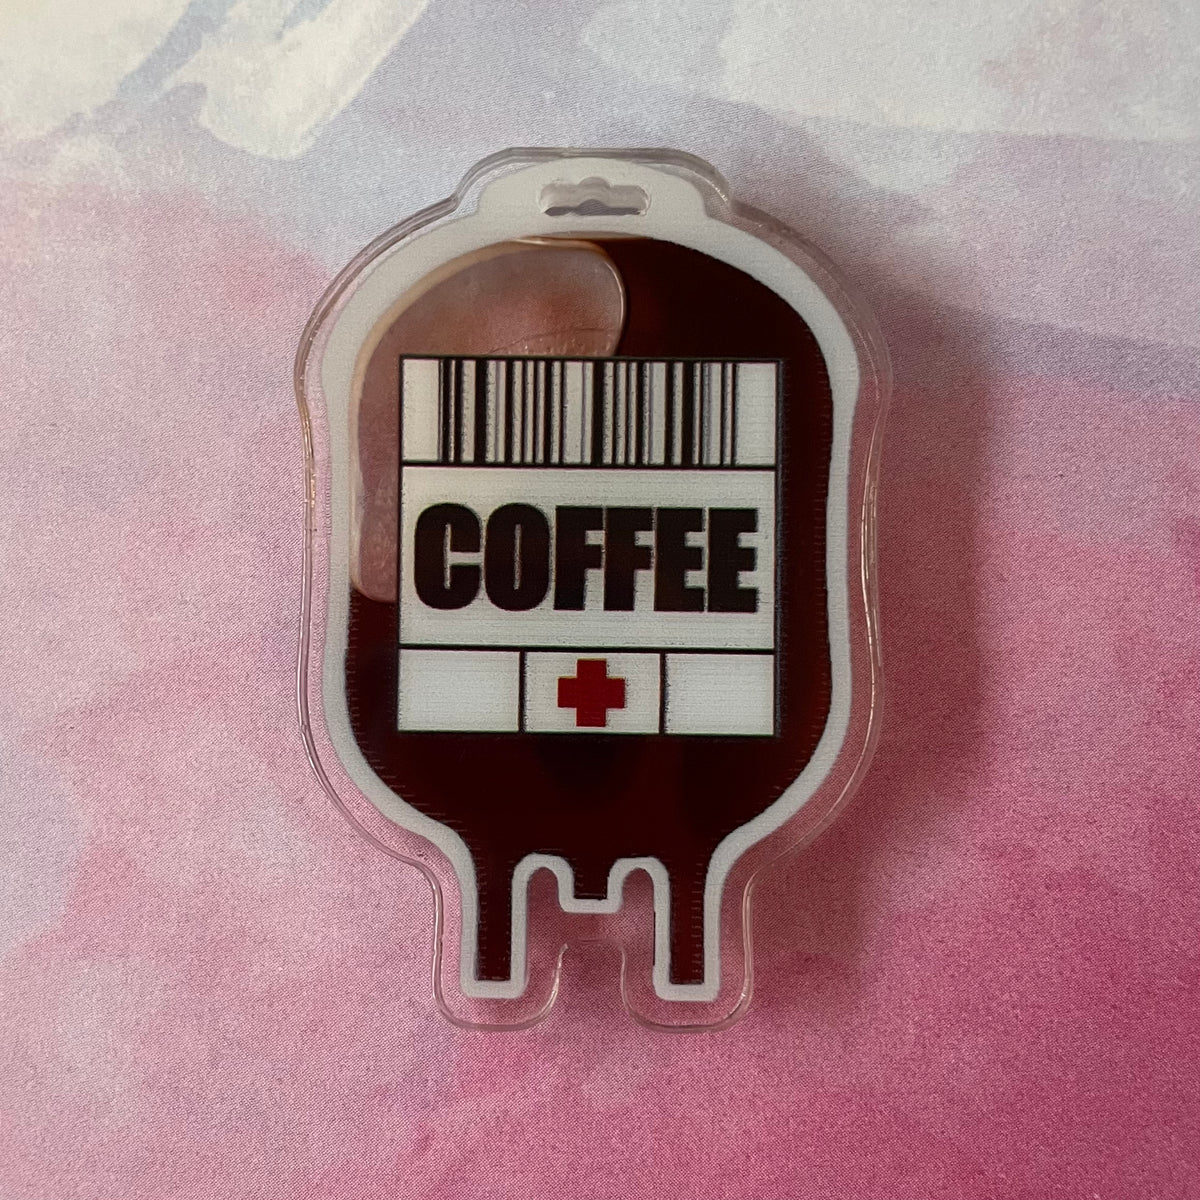 Coffee IV Bag - Liquid Filled Swappable Badge Reel Design TOP